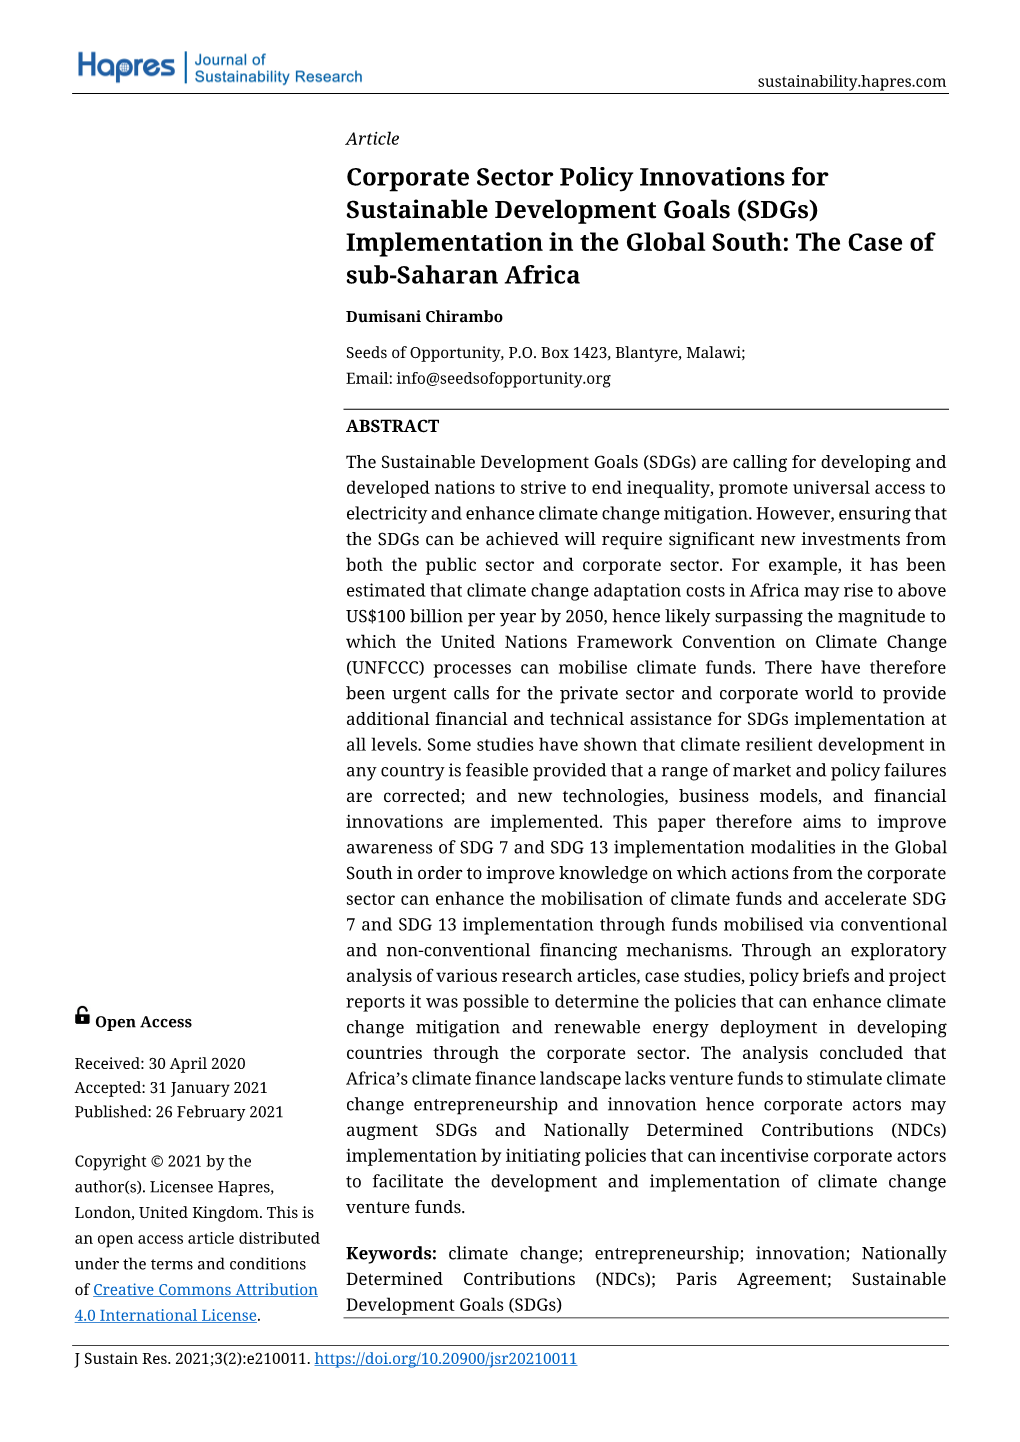 (Sdgs) Implementation in the Global South: the Case of Sub-Saharan Africa